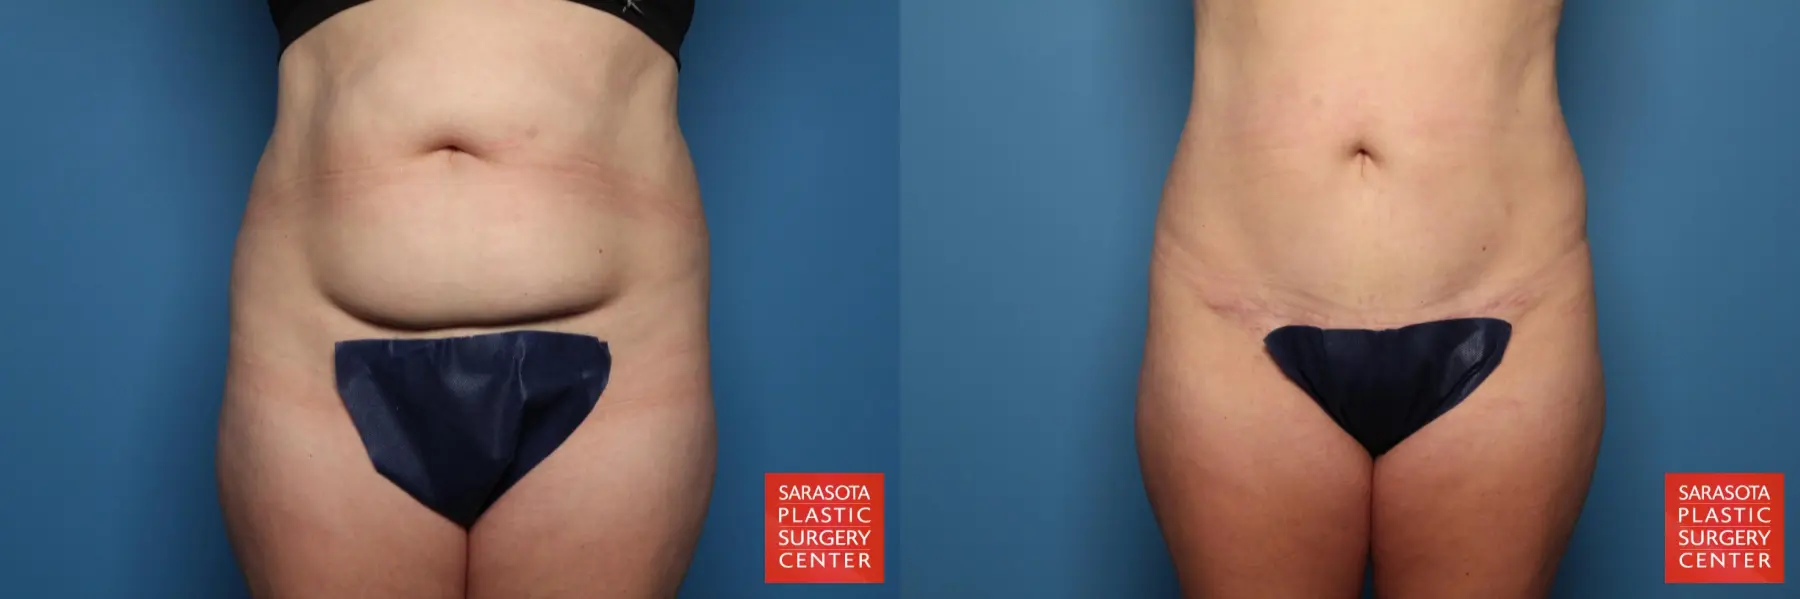 Mini Tummy Tuck: Patient 3 - Before and After 1